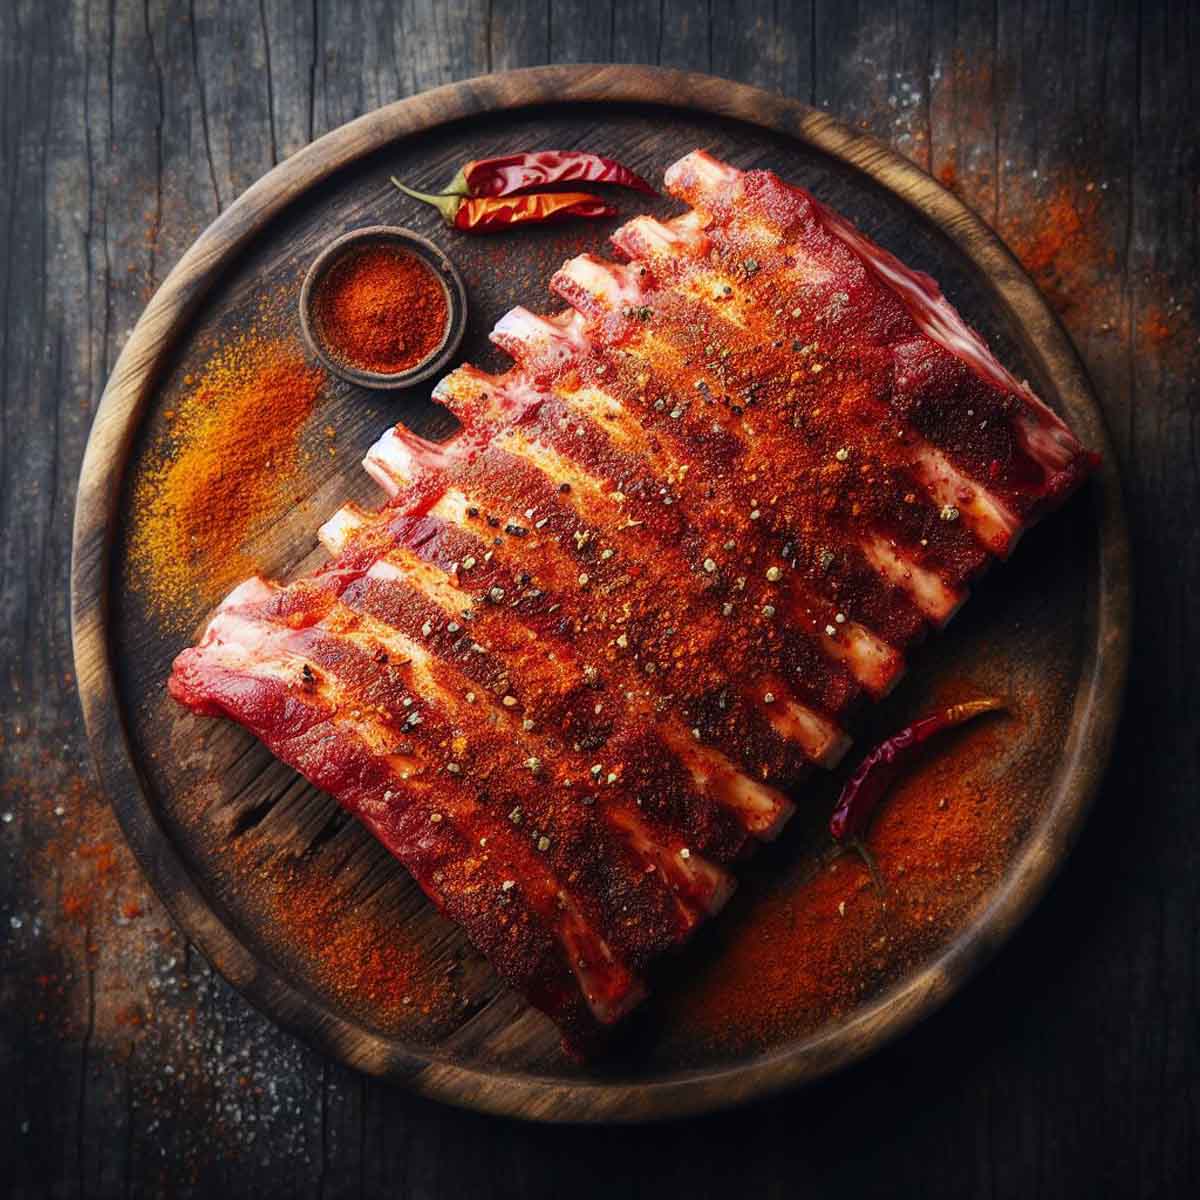 Overhead view of raw spare ribs coated with a rich, red-hued dry rub on a wooden board.